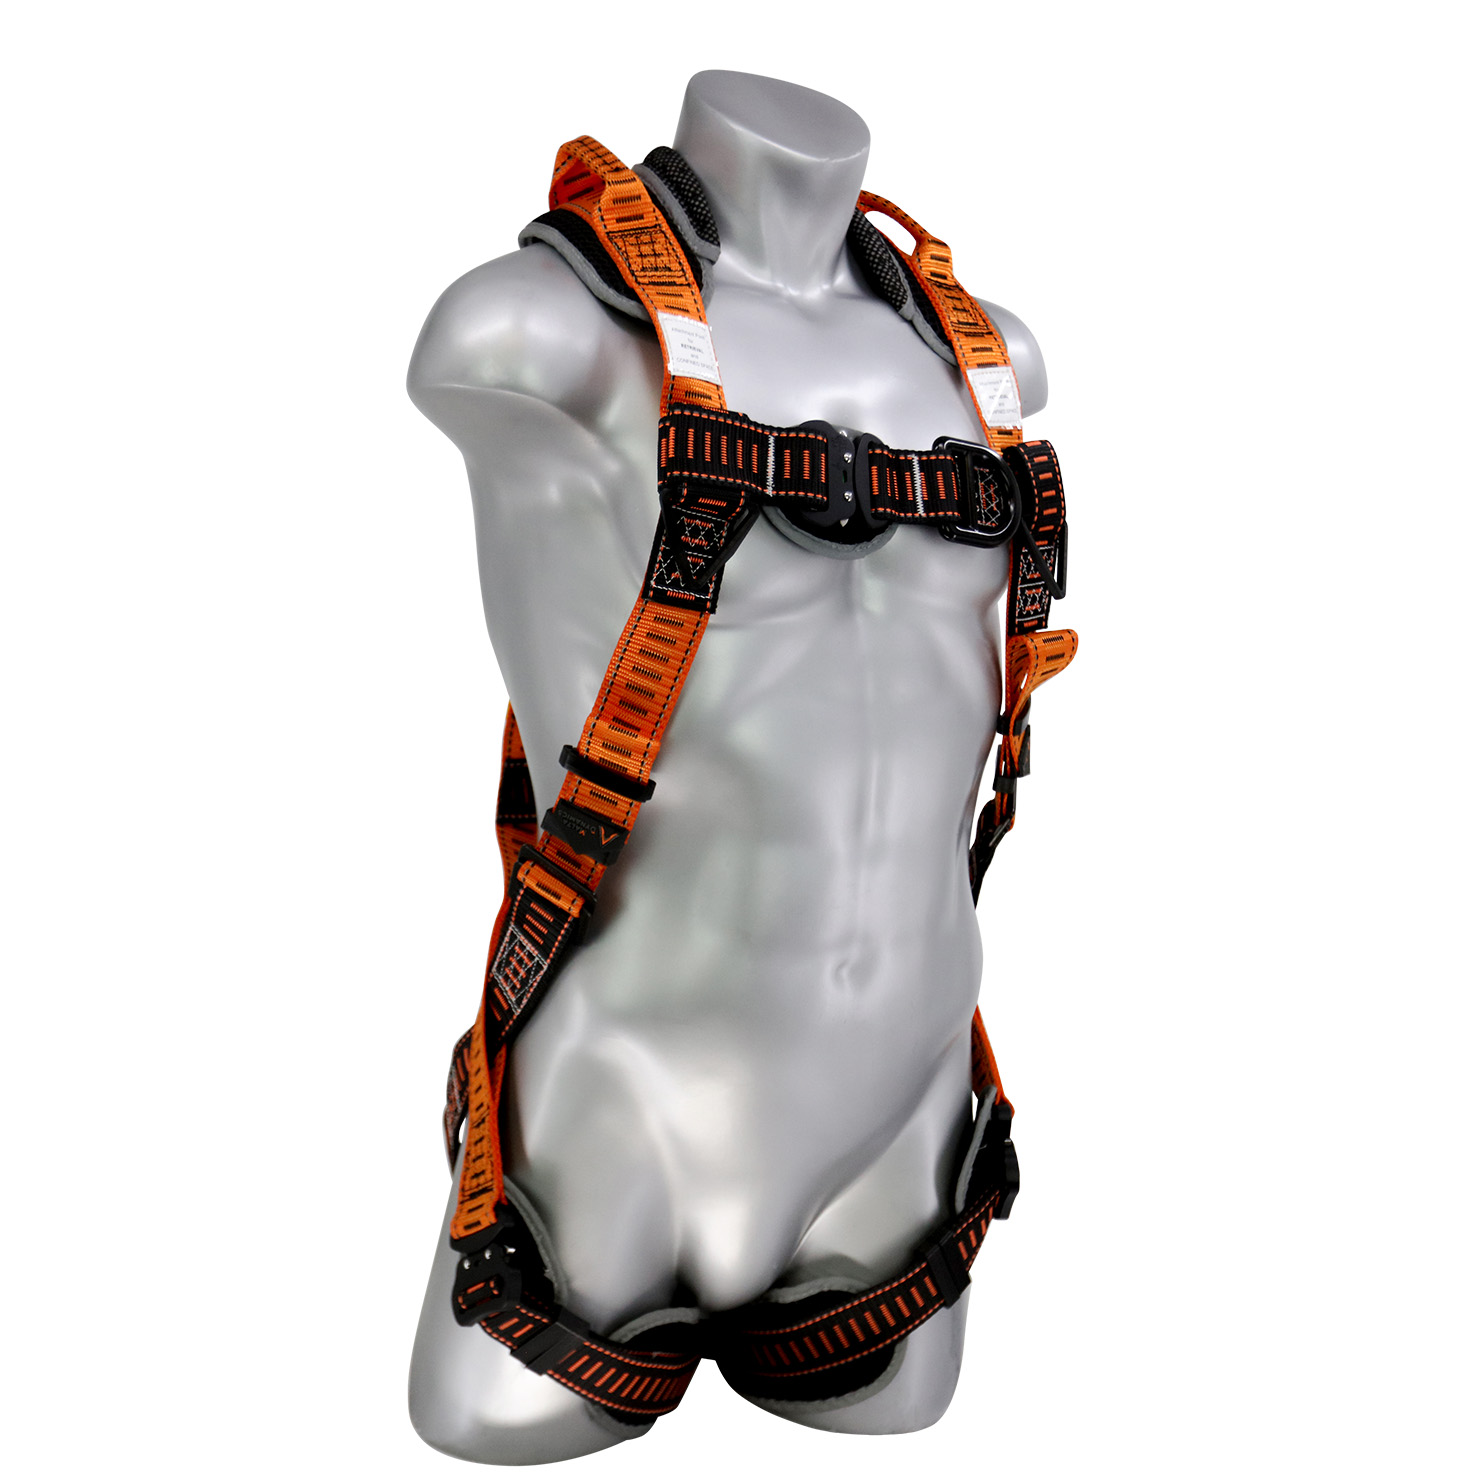 New-malta Dynamics Harness Shoulder Pad Pair Breathable Comfort and Safety for sale online 